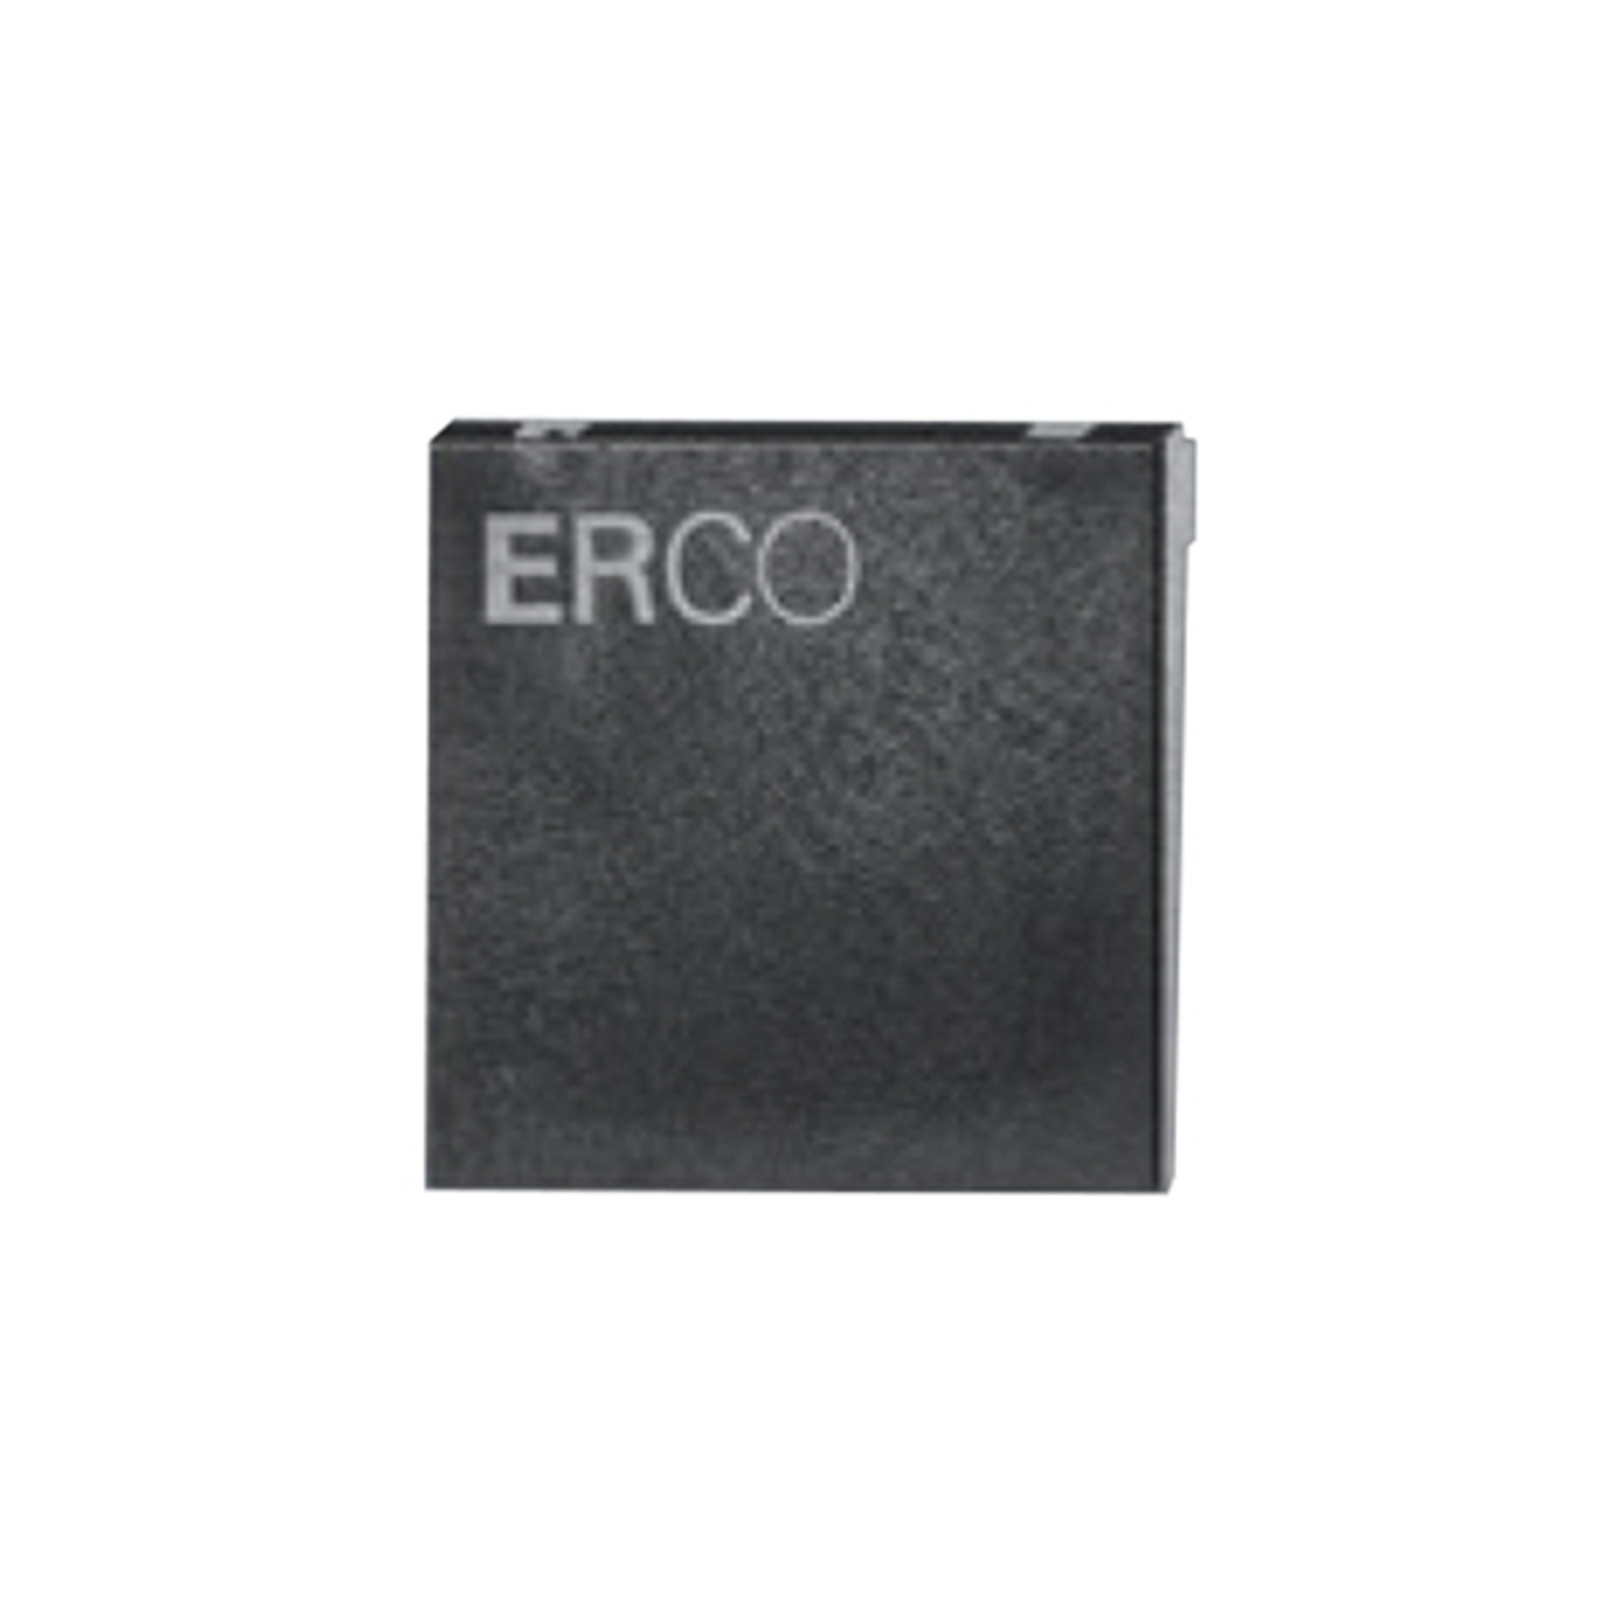 ERCO end plate for three-circuit track, black